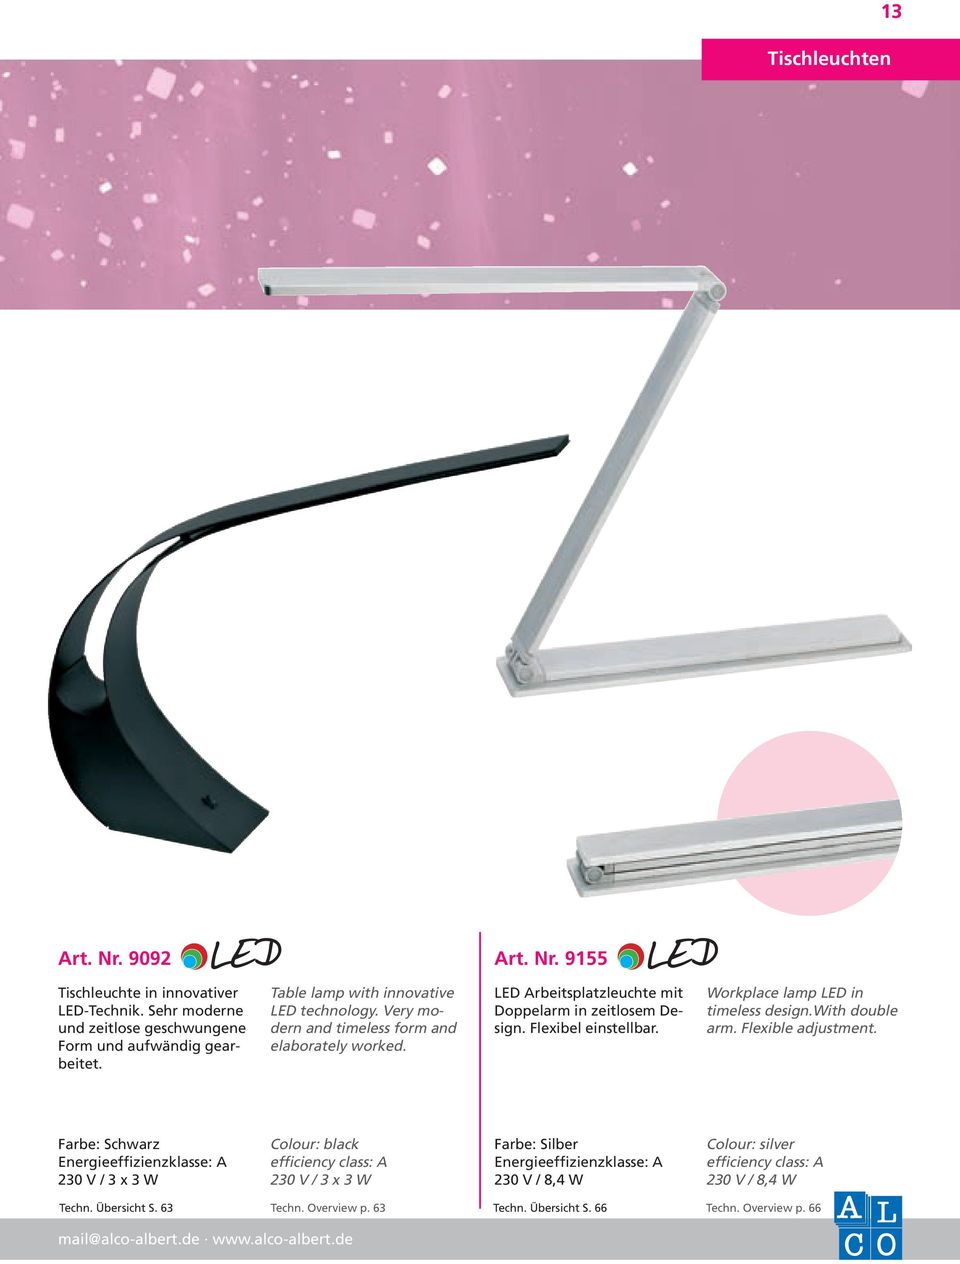 Flexibel einstellbar. Workplace lamp in timeless design.with double arm. Flexible adjustment.